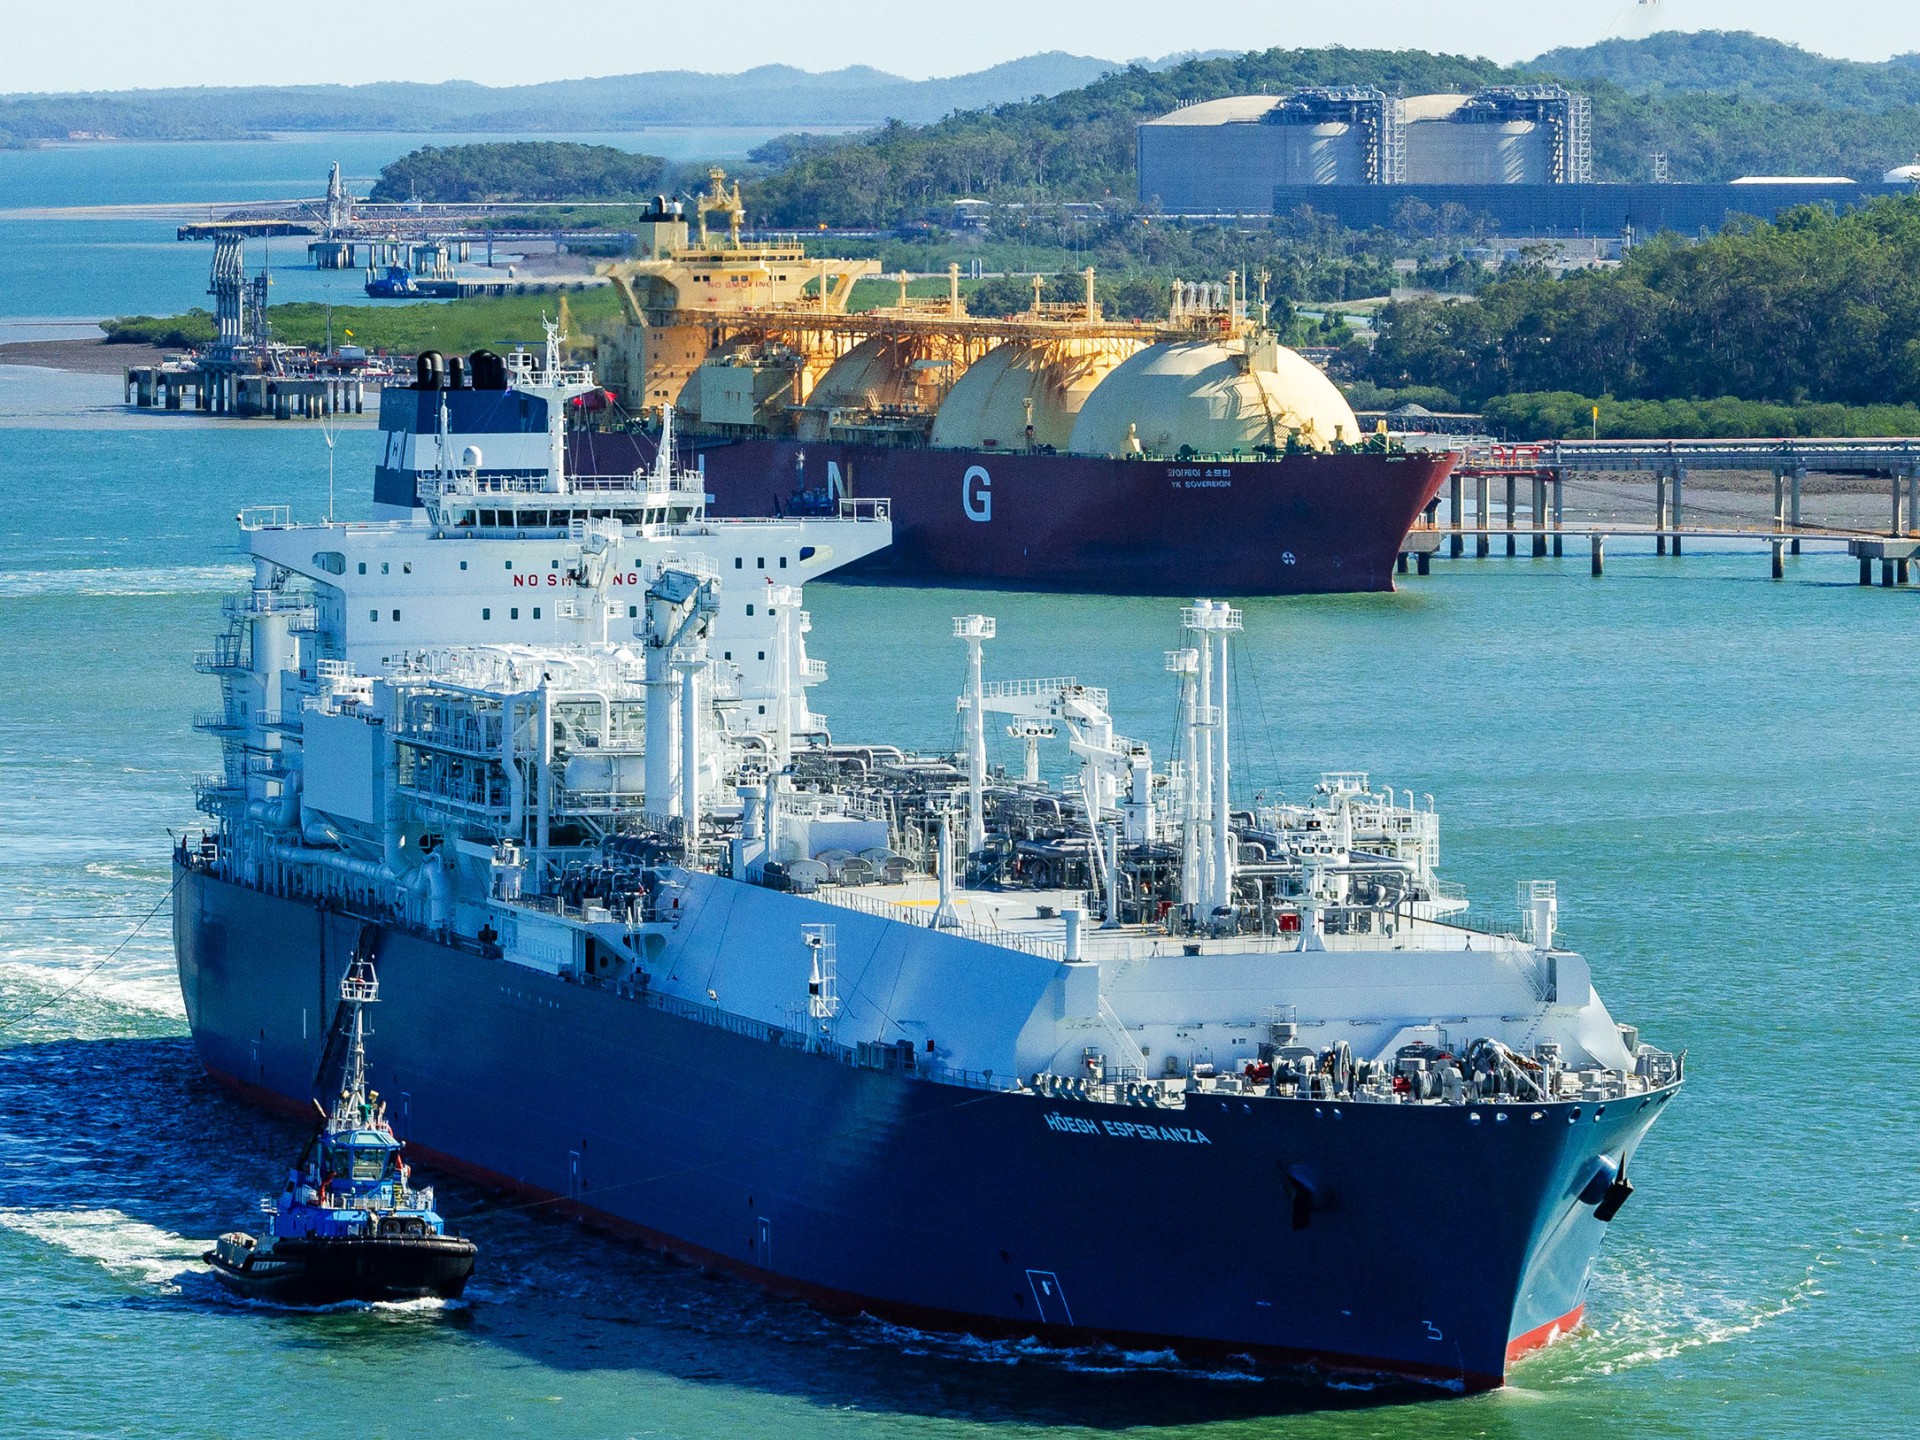 A Floating Storage and Regasification Unit (FSRU) next to an LNG tanker in the port